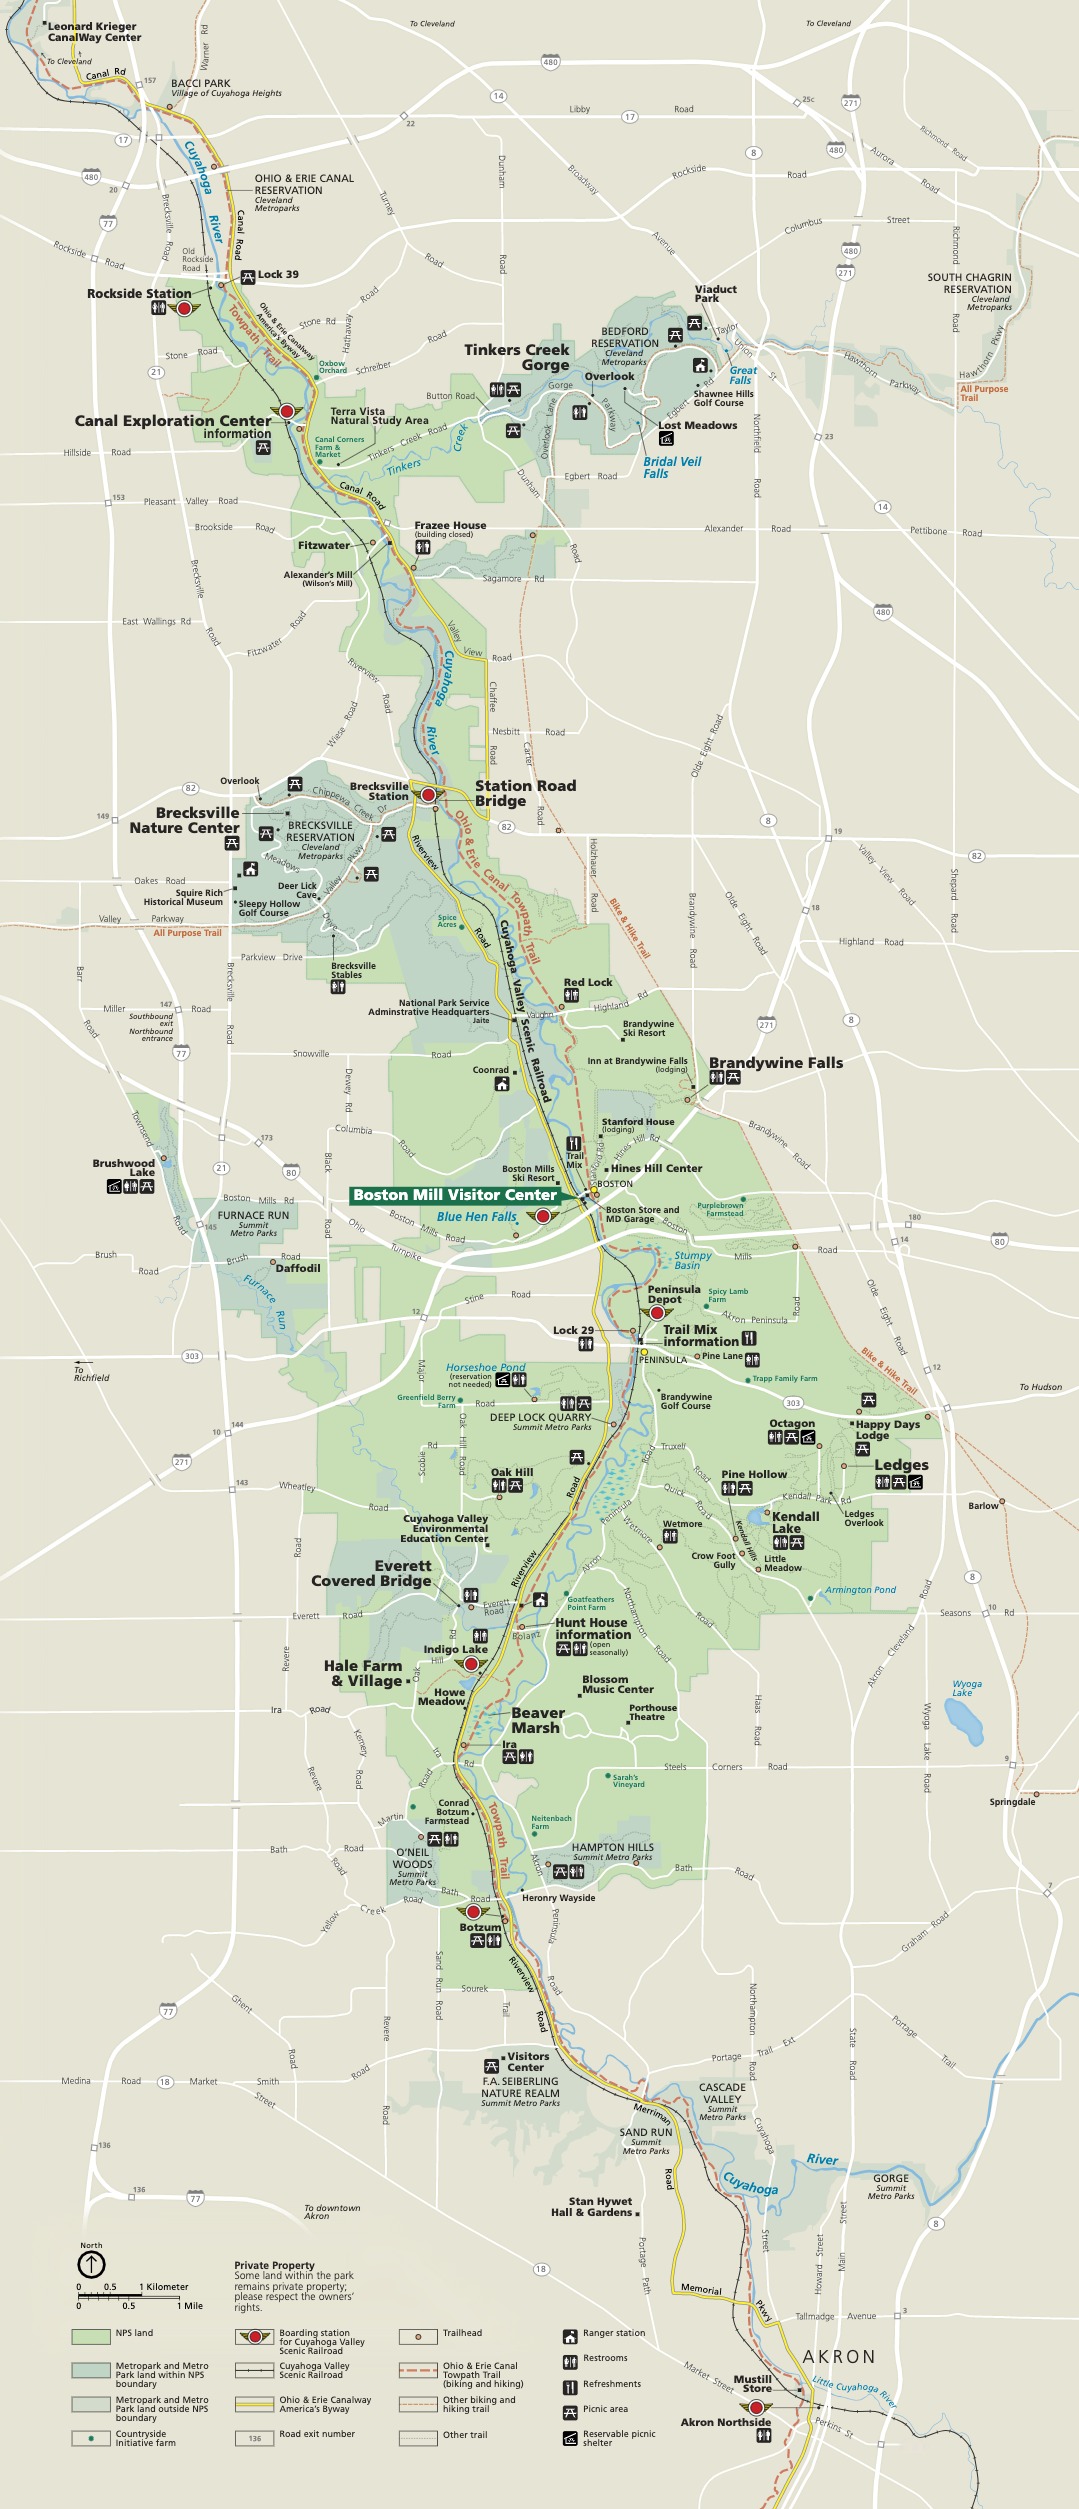 A Map Of The Entire Area Of Cuyahoga Valley National Park (CVNP). The Boundaries And Interior Of The Area Designated To CVNP Are Colored A Light Green. Markers Indicate Destinations Across The Park As Well As Various Amenities And Roadways. - A map of the entire area of Cuyahoga Valley National Park (CVNP). The boundaries and interior of the area designated to CVNP are colored a light green. Markers indicate destinations across the park as well as various amenities and roadways.